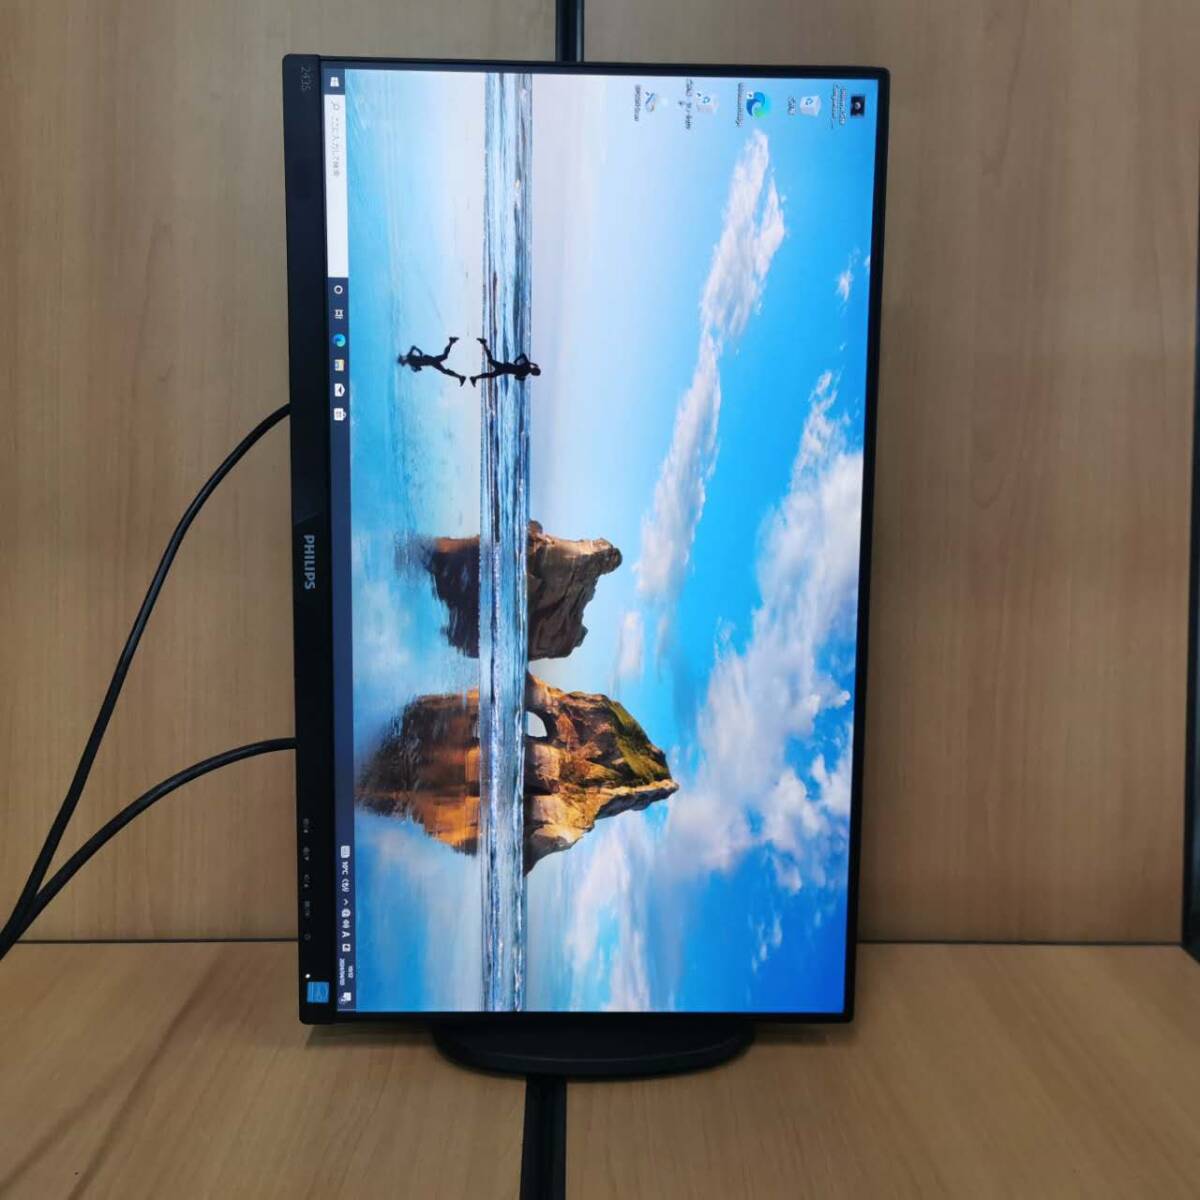 PHILIPS 243S7E /11 23.8 -inch wide liquid crystal display full HD/IPS/HDMI/DisplayPort 2019 year made going up and down. rotation possibility * operation verification settled 